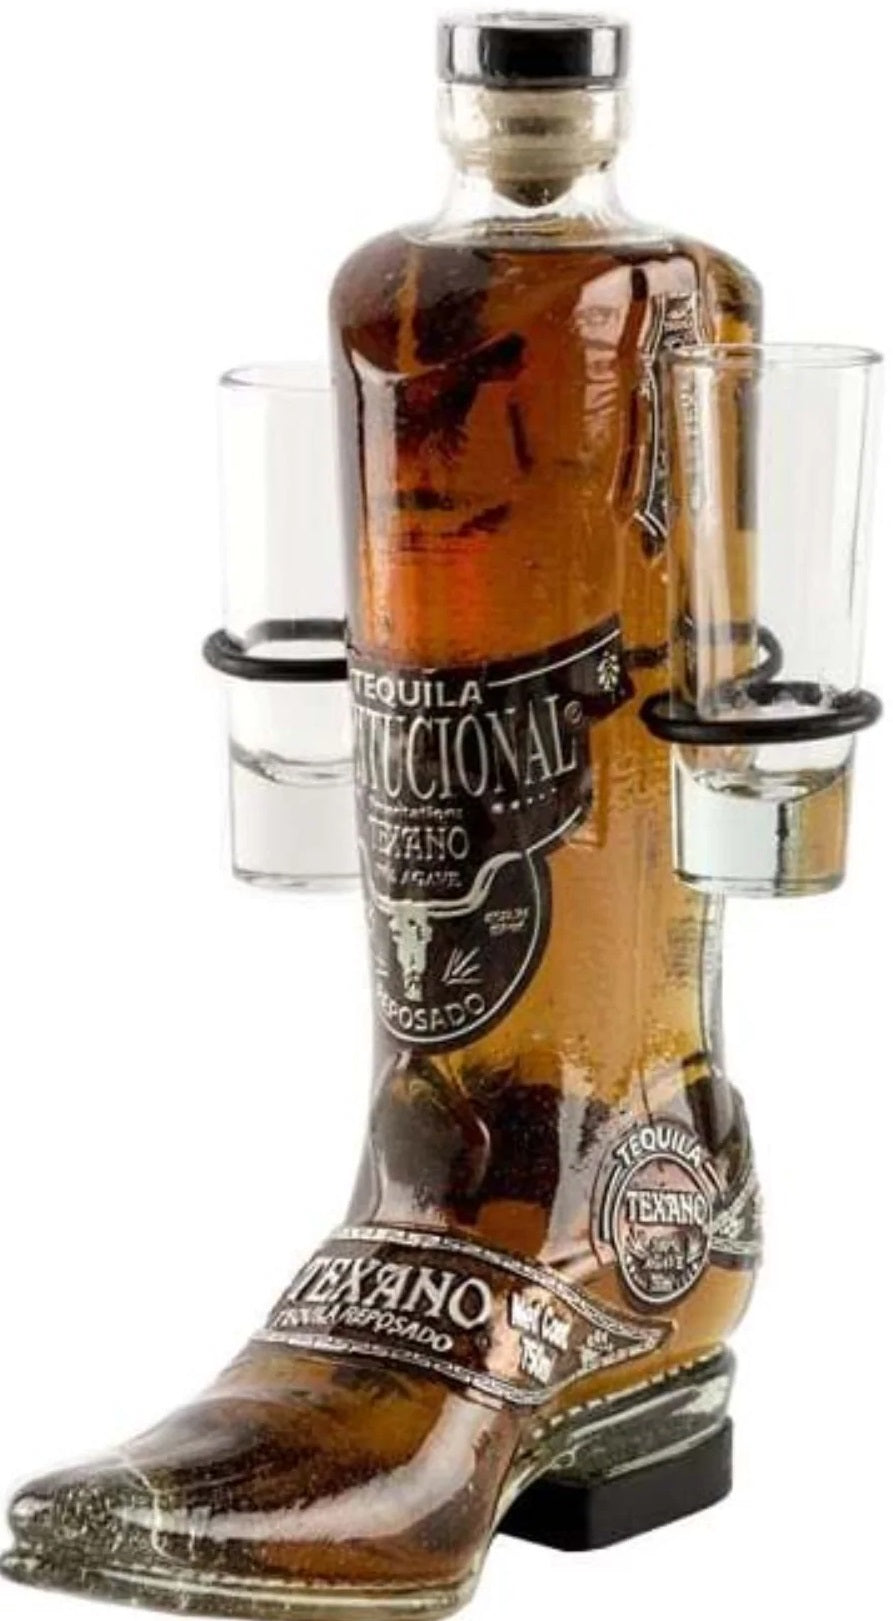 Texano Reposado Tequila (Cowboy Boot Bottle) – Wine Chateau